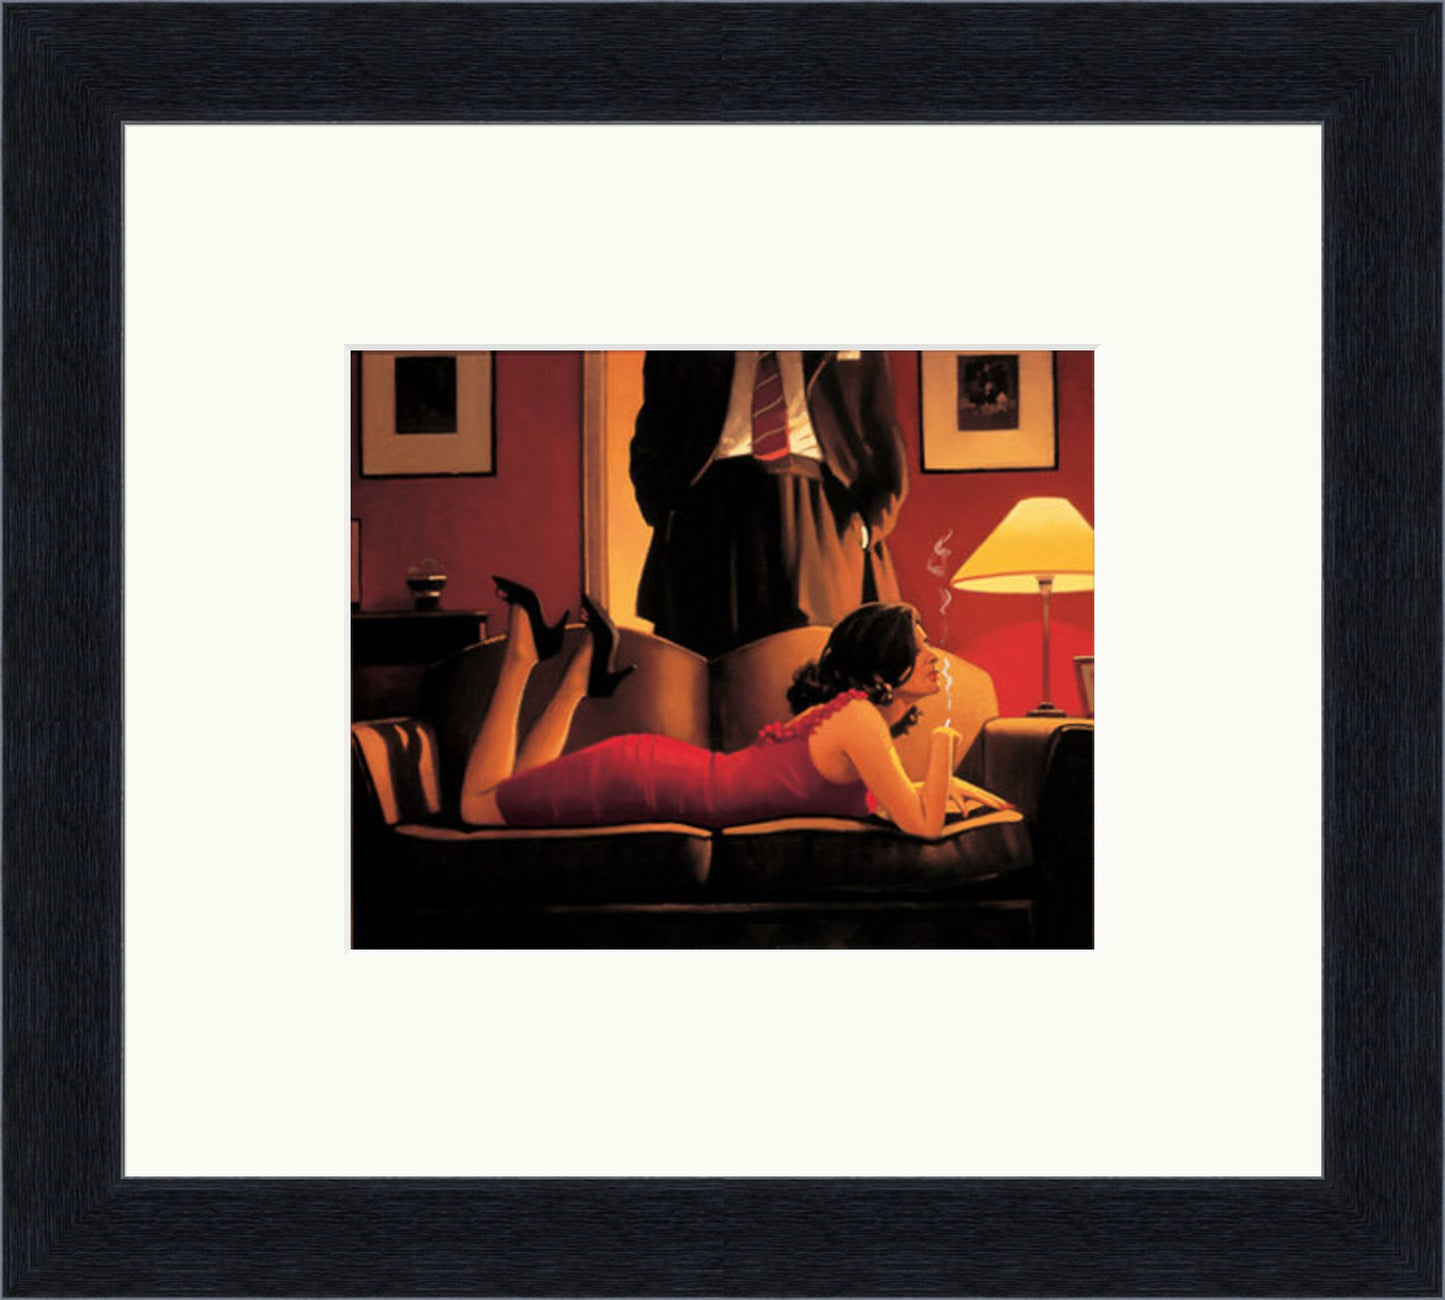 The Parlour of Temptation by Jack Vettriano - Petite